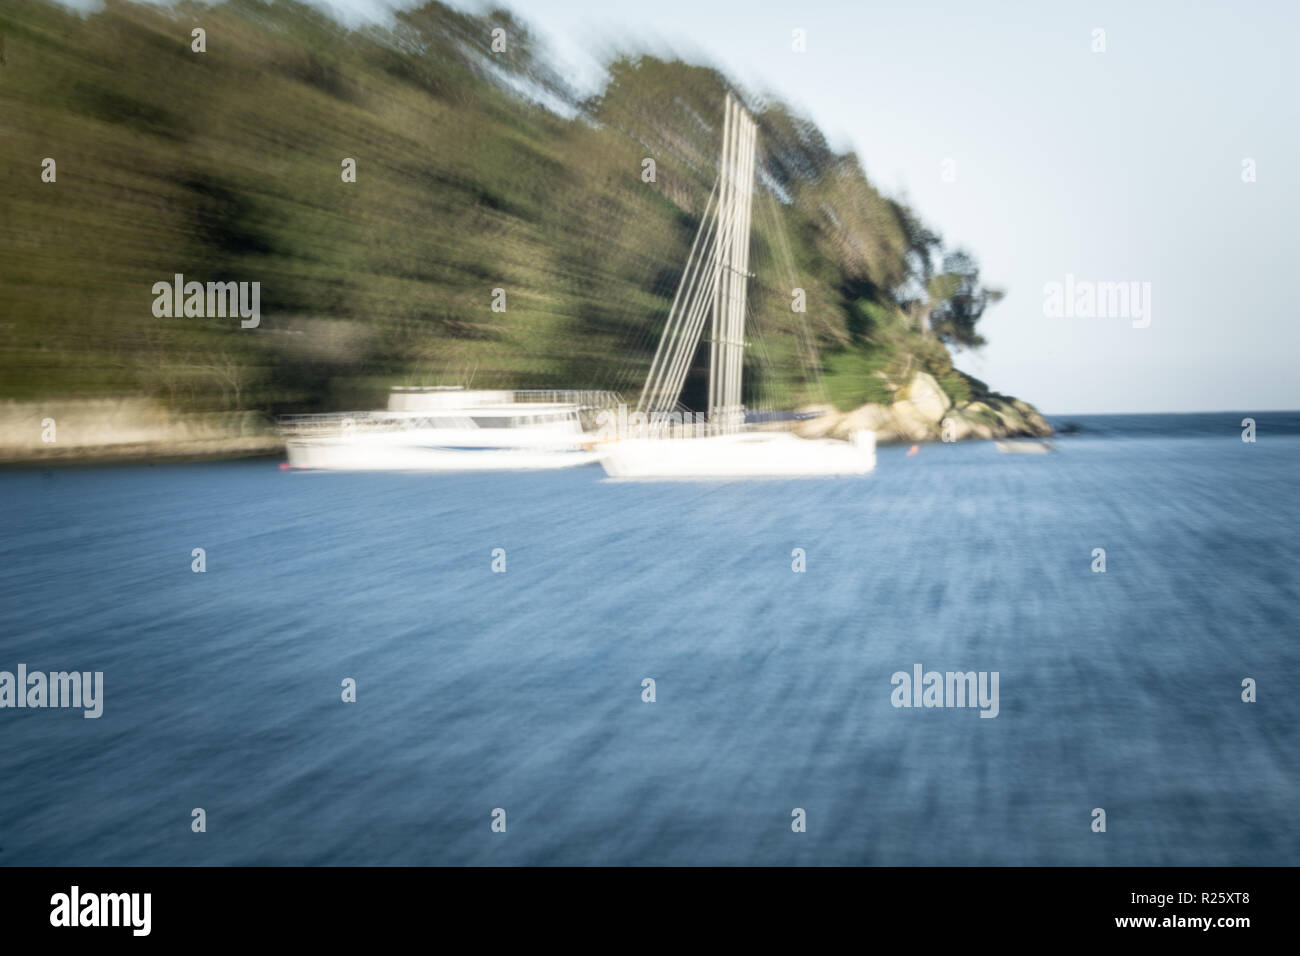 Background image abstract zoom blur at beach with morred yacht and boat Stock Photo